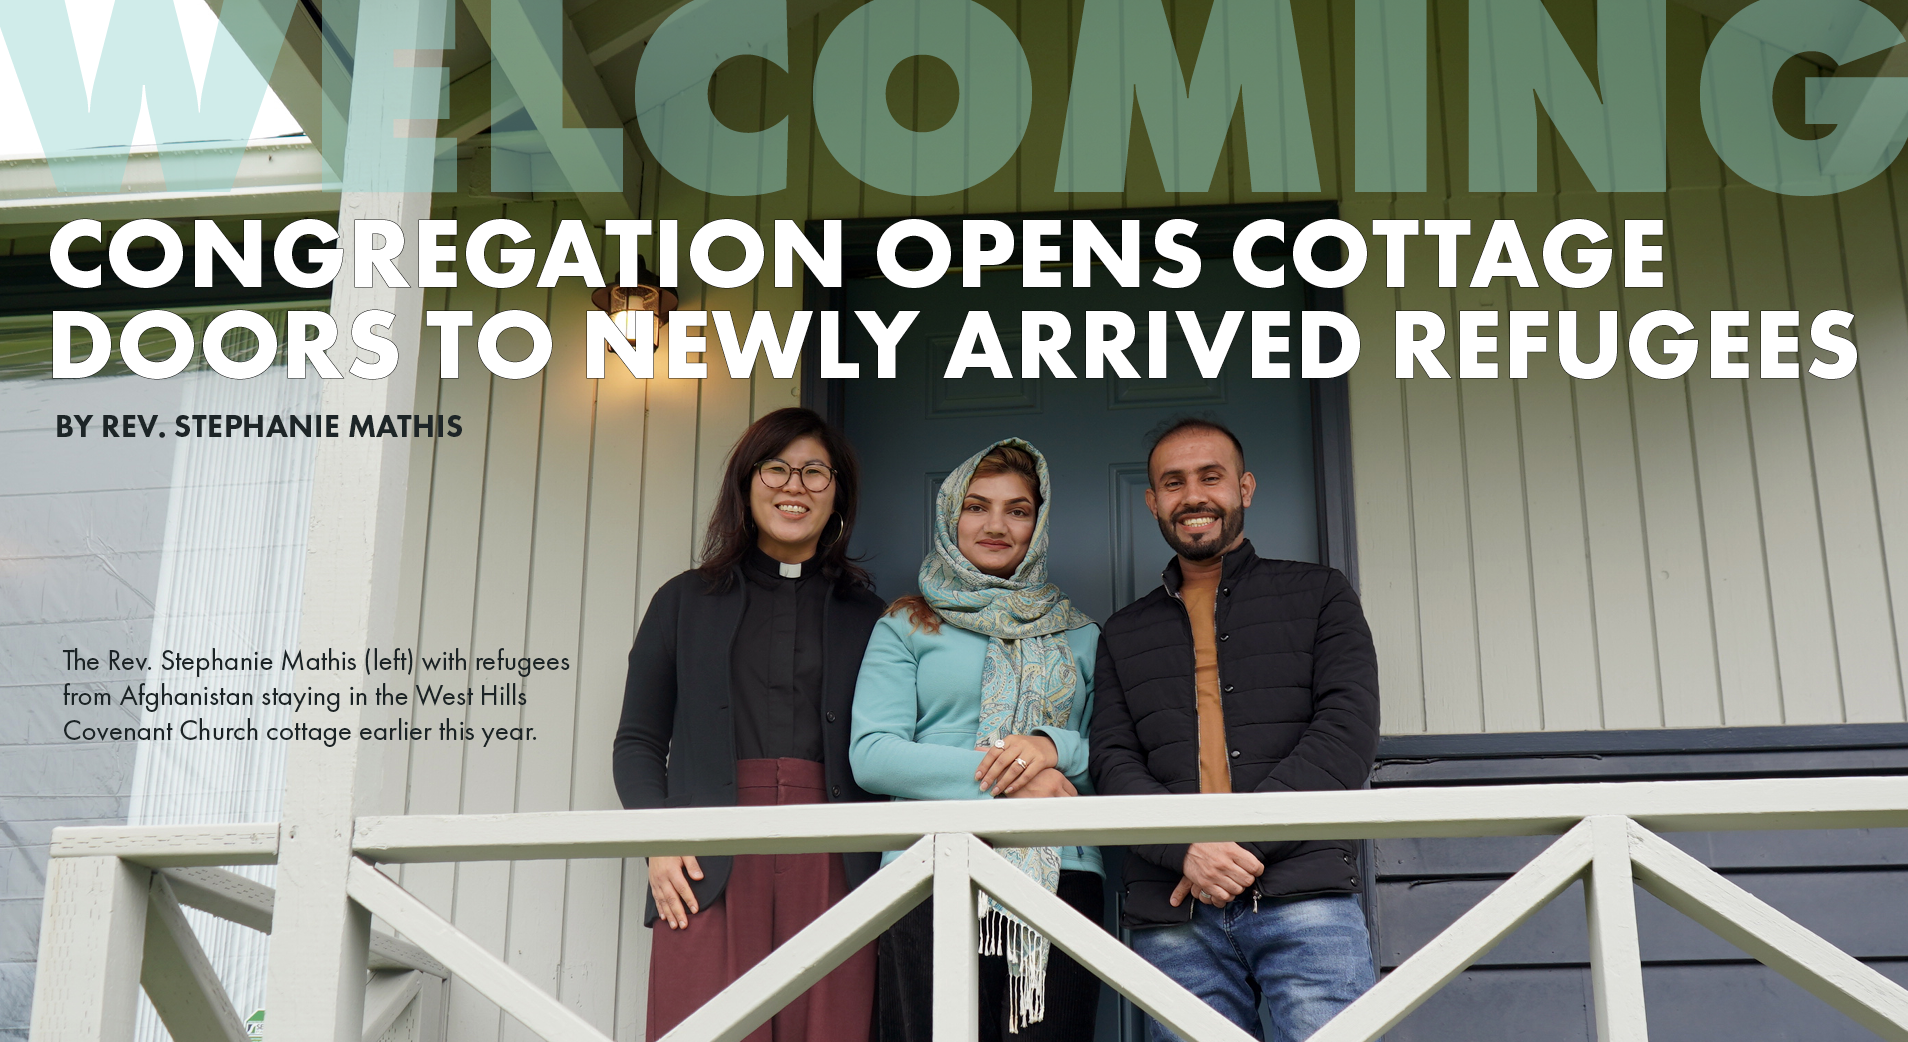 Congregation Opens Cottage Doors to Newly Arrived Refugees